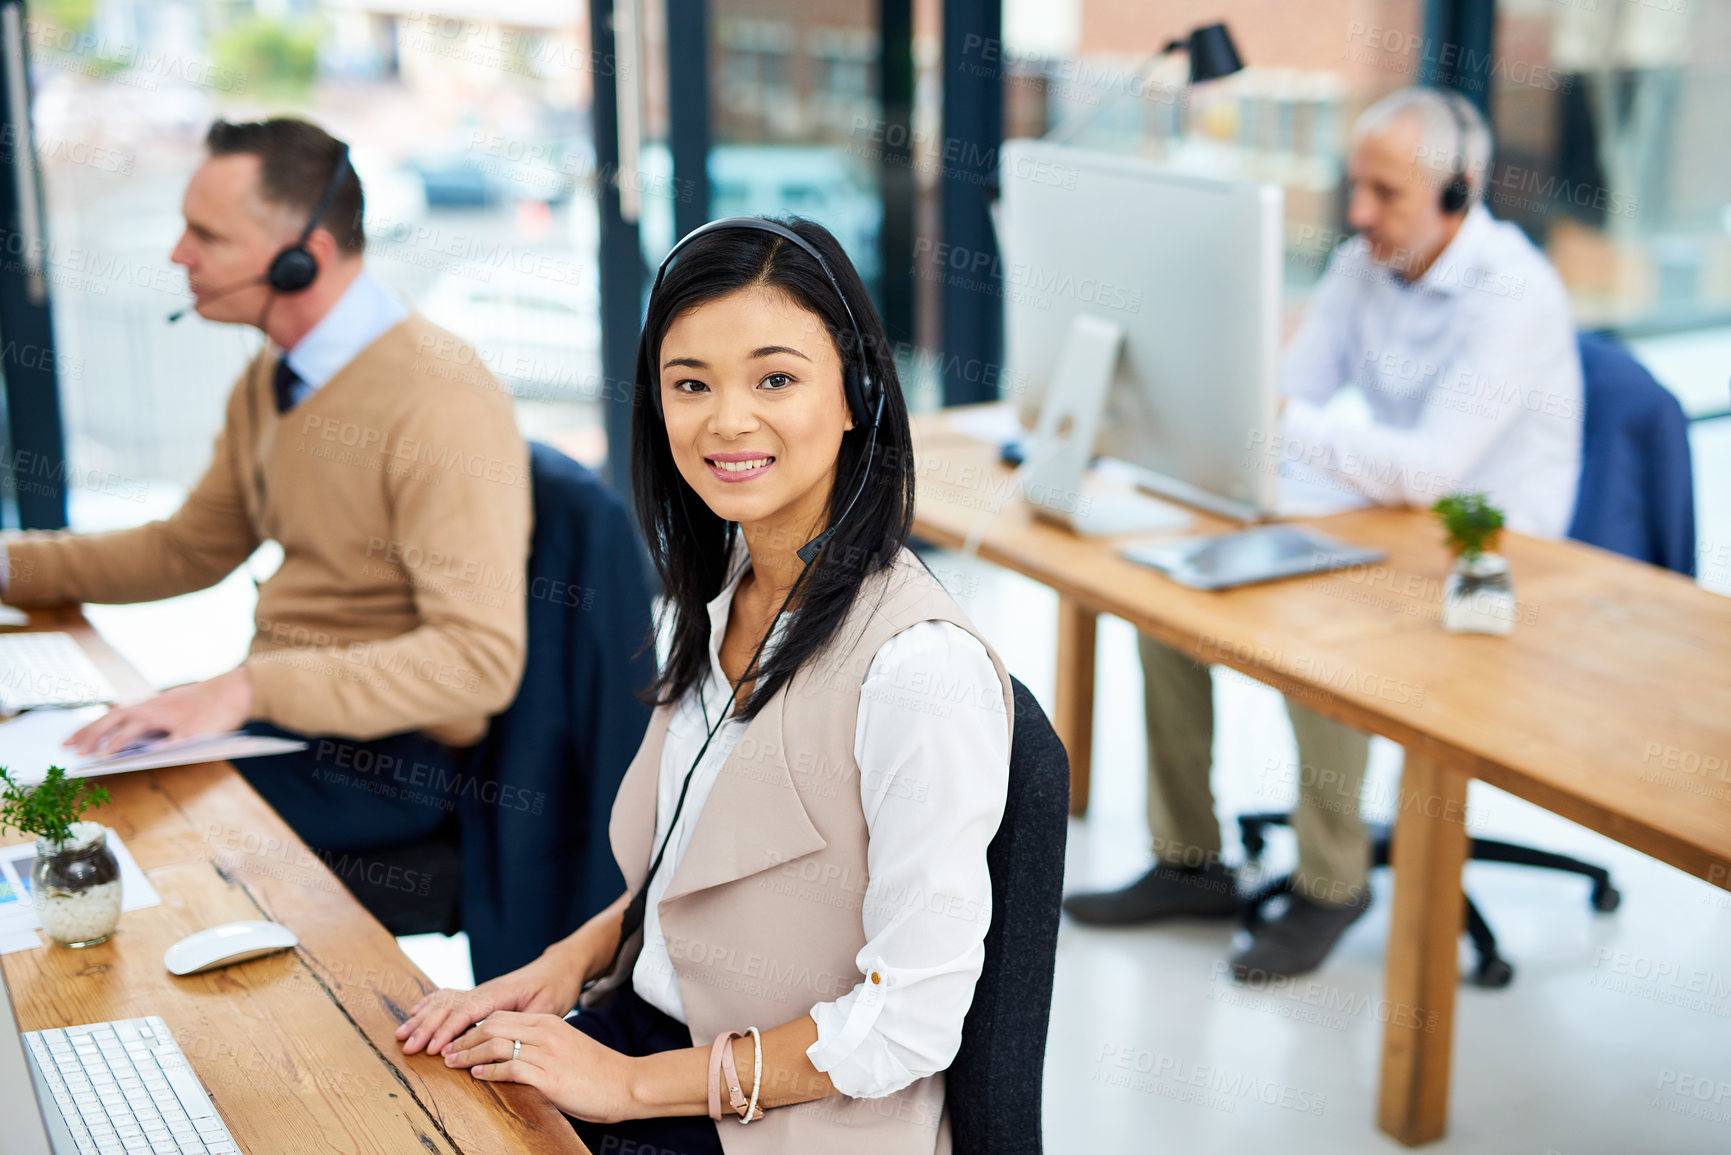 Buy stock photo Cropped portrait of a young businesswoman working in her office with colleagues in the background